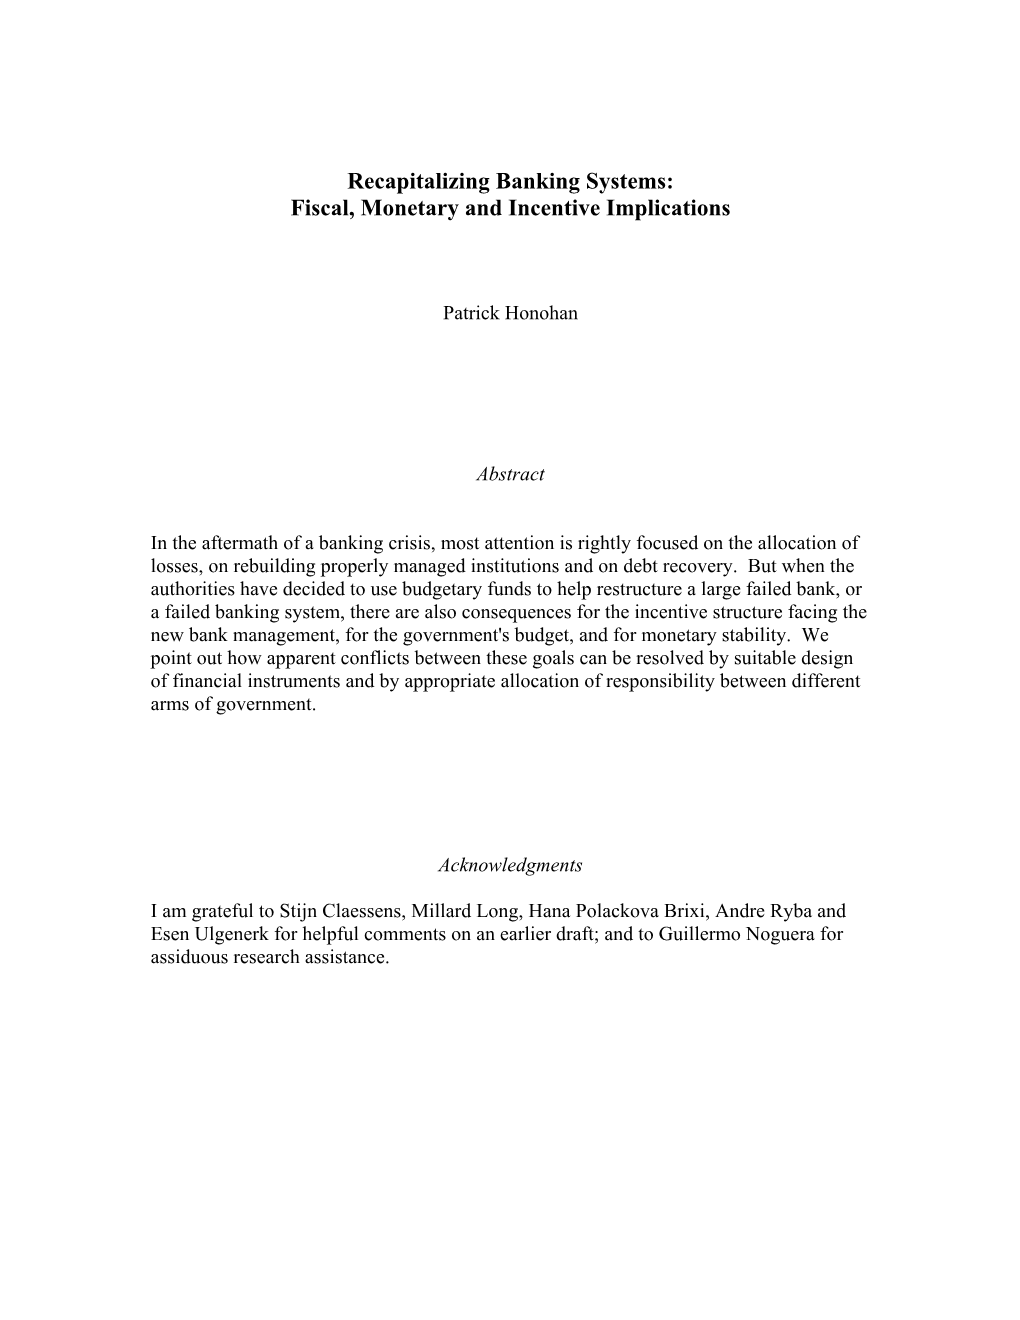 Recapitalizing Banking Systems: Fiscal, Monetary and Incentive Implications